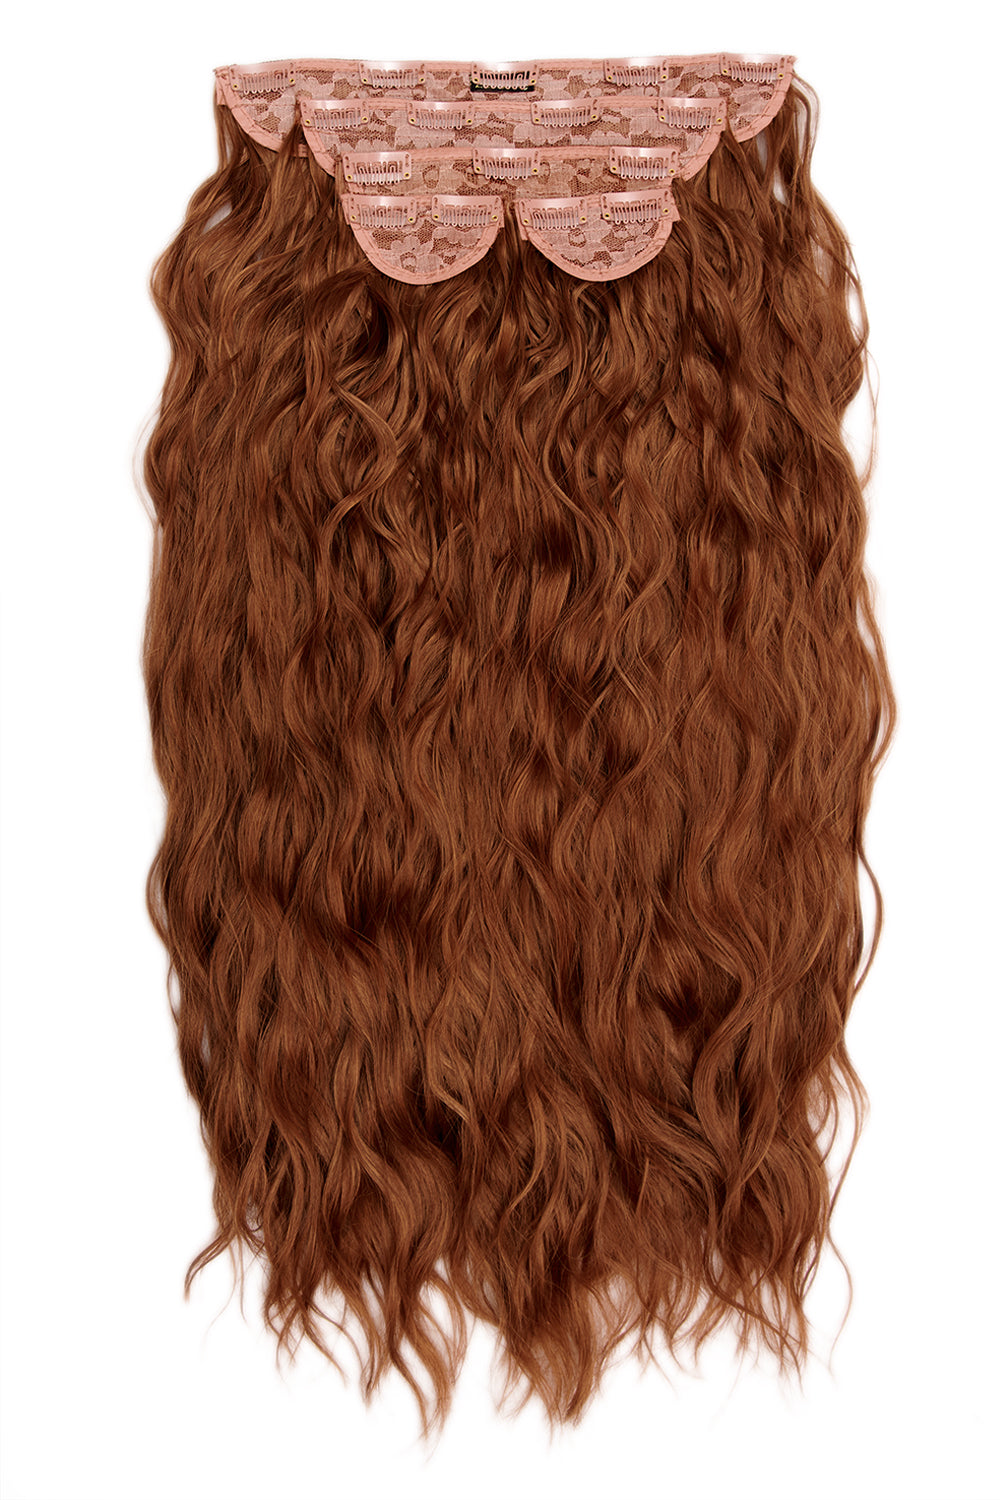 Super Thick 26" 5 Piece Waist Length Wave Clip In Hair Extensions - LullaBellz  - Copper Red